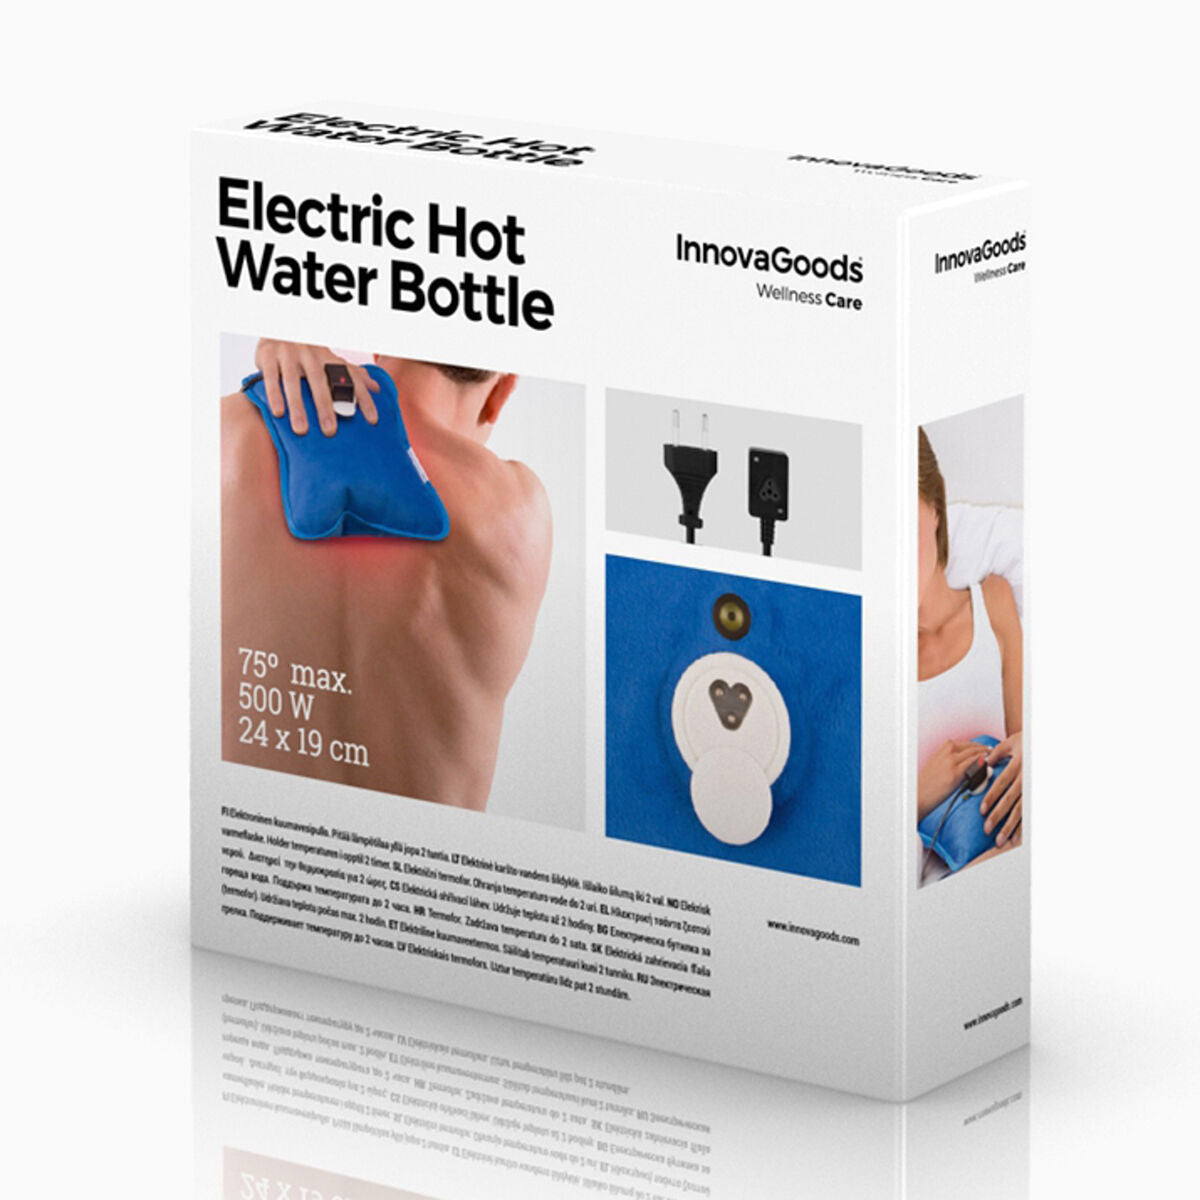 Electric Hot Water Bottle InnovaGoods - Calm Beauty IE